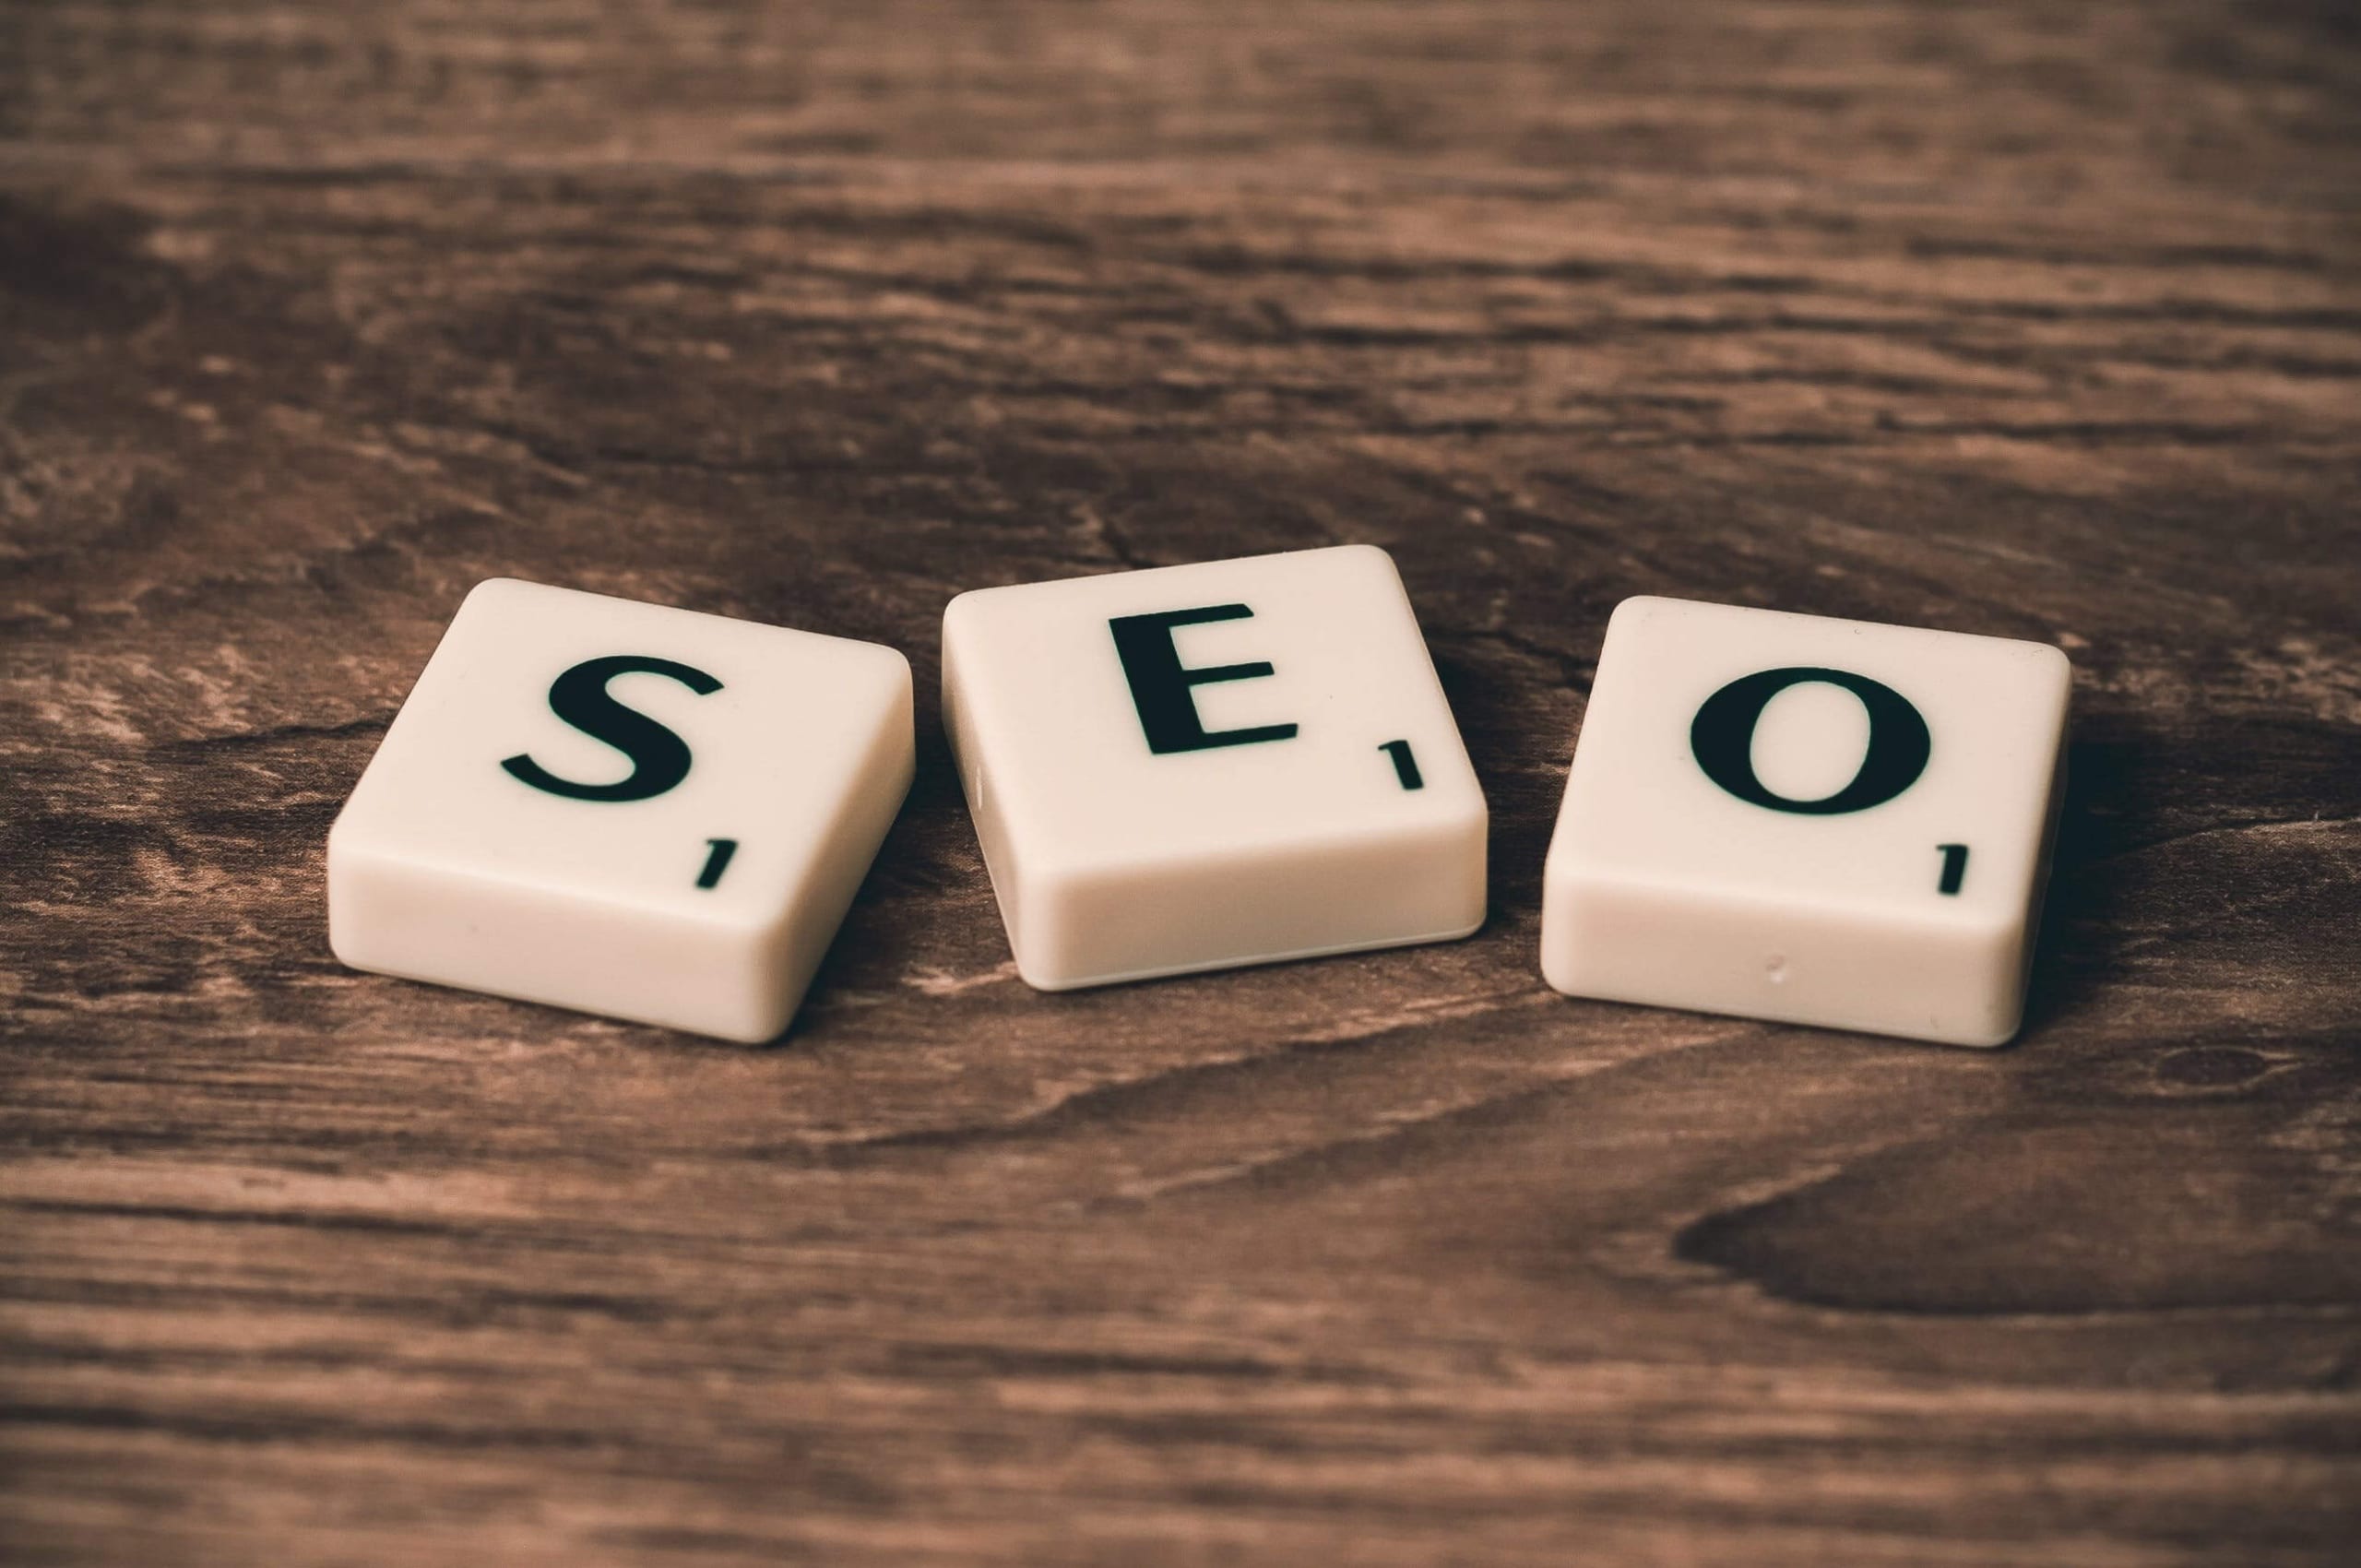 Image of tile letters on a wood table spelling out SEO. Discover how SEO for private practice owners can help establish your business find your ideal clients.